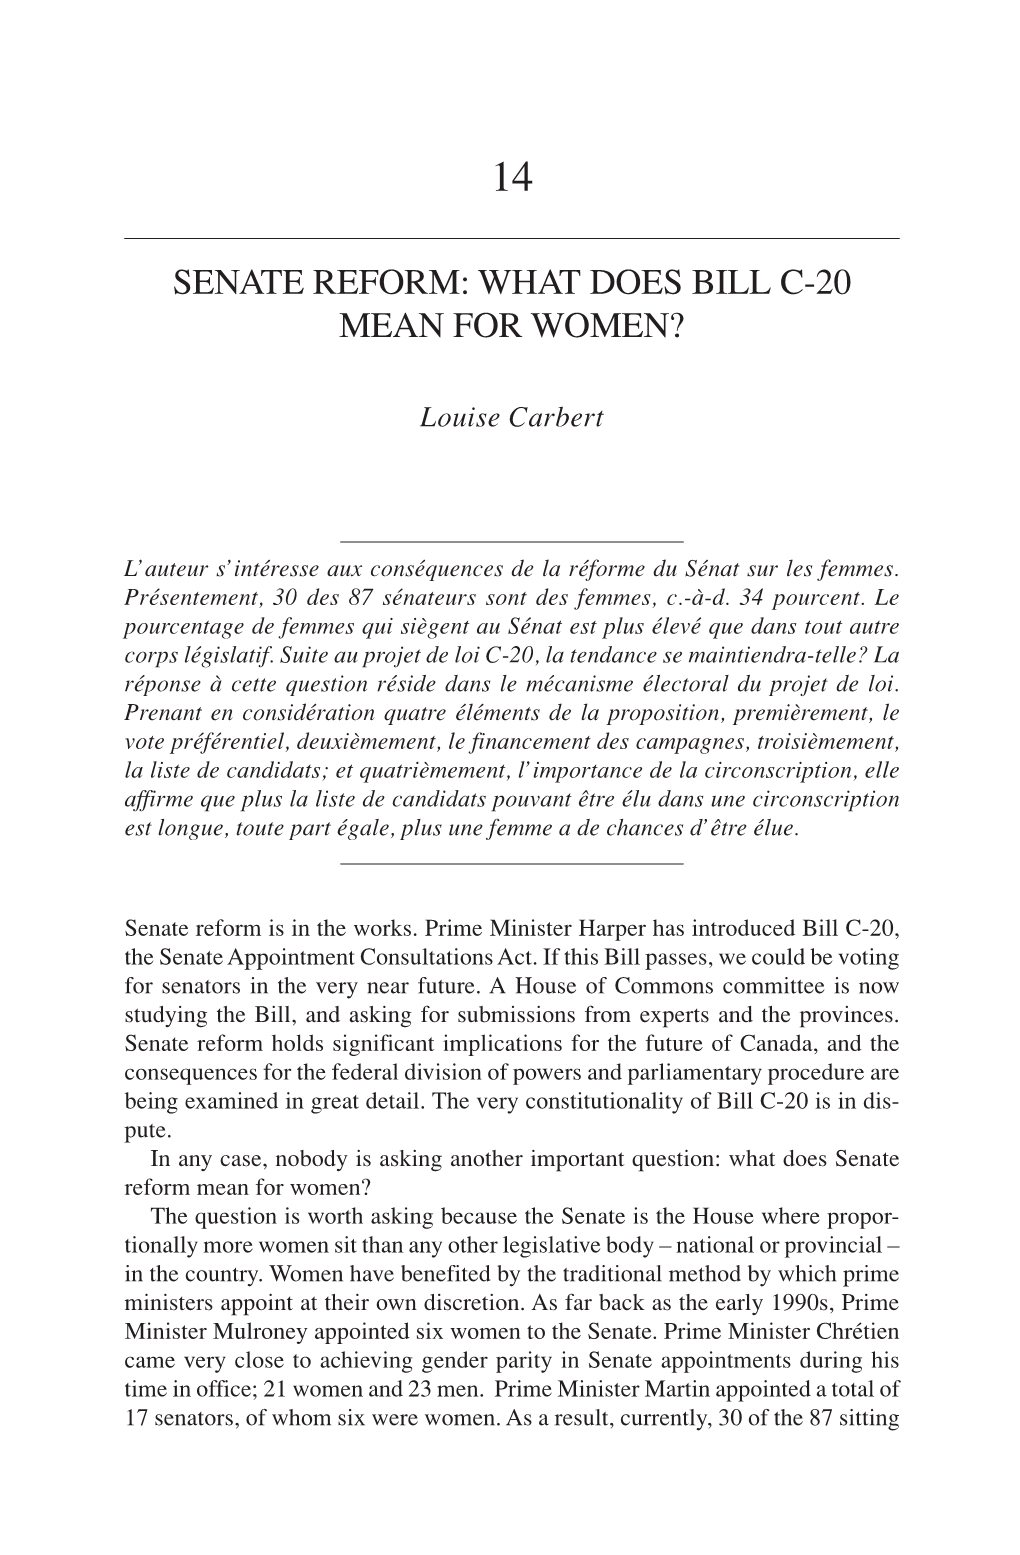 Senate Reform: What Does Bill C-20 Mean for Women?